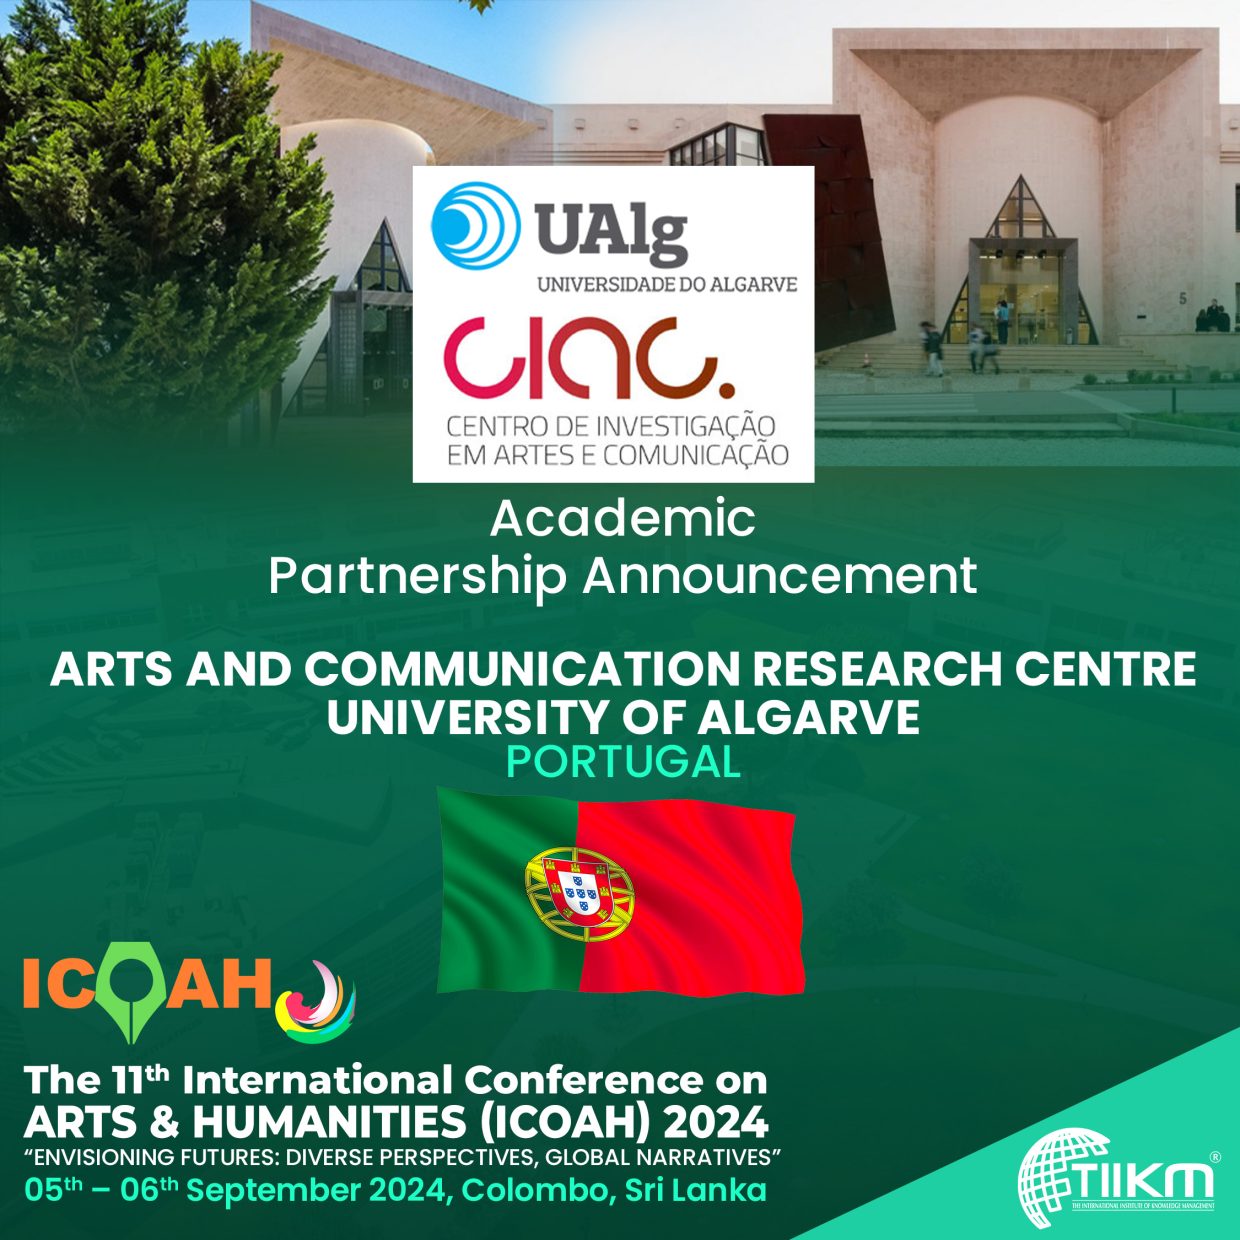 The 11th International Conference on Arts & Humanities - ICOAH 2024